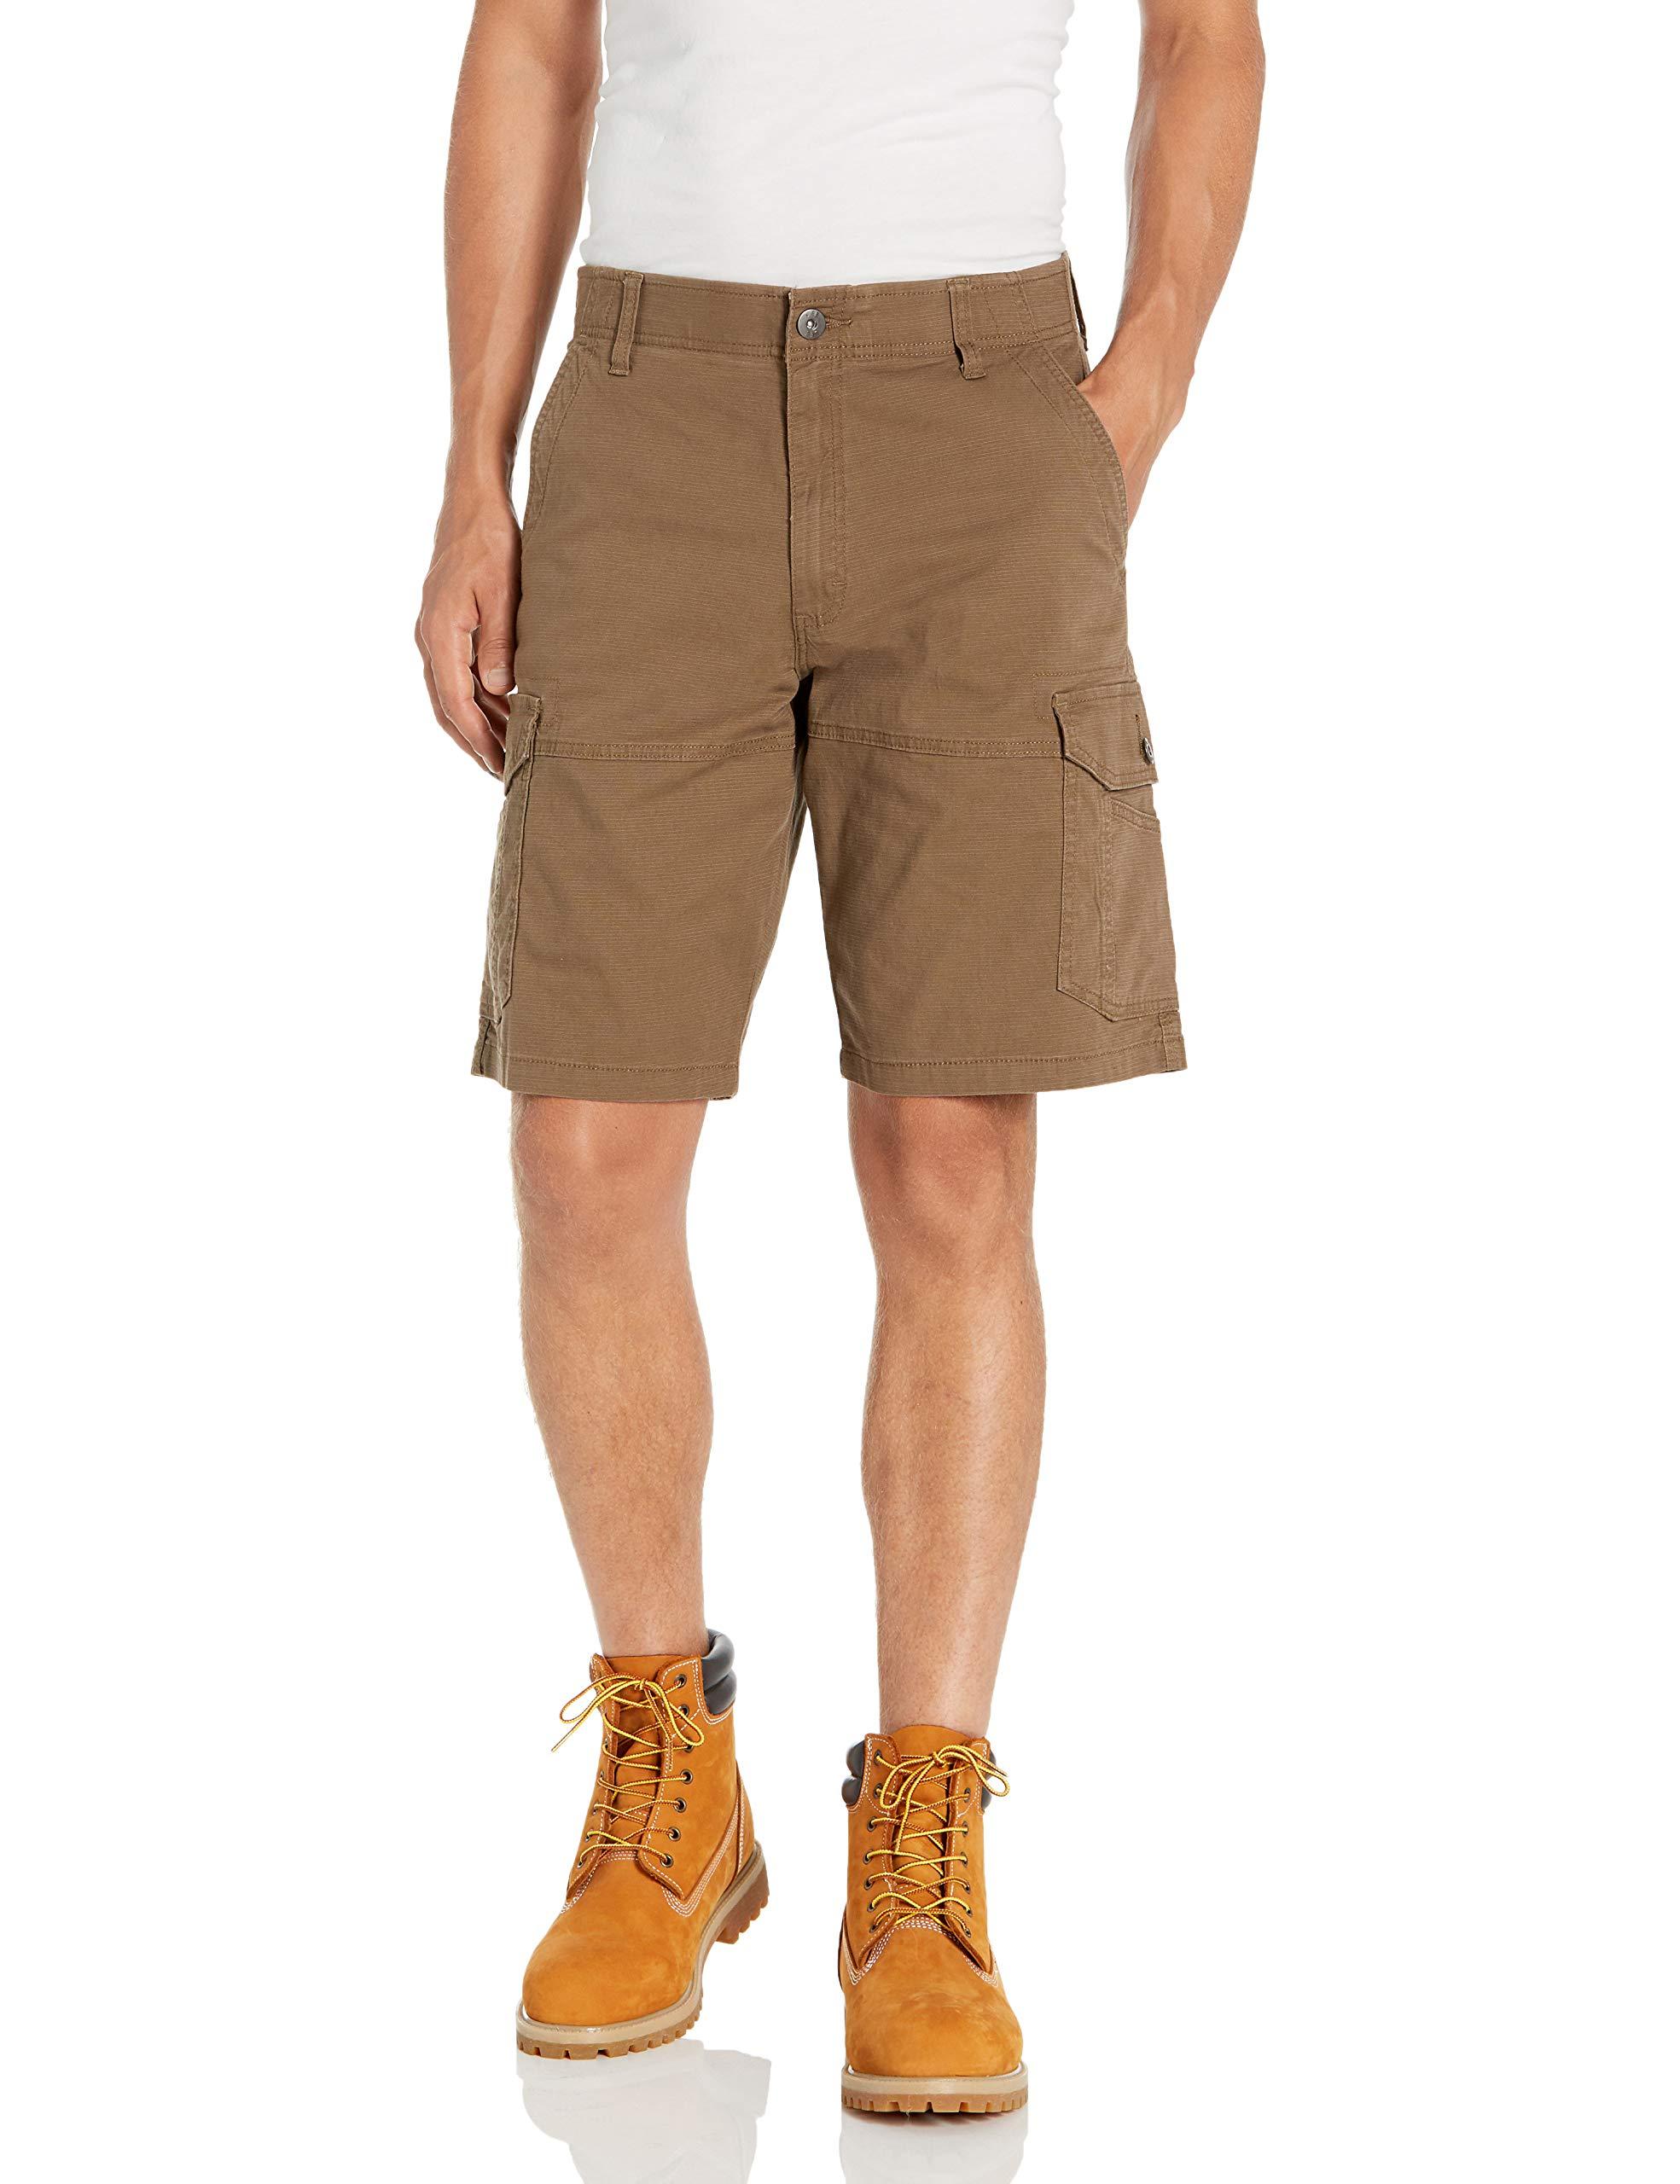 Lee Jeans Canvas Cargo Short for Men - Save 14% - Lyst